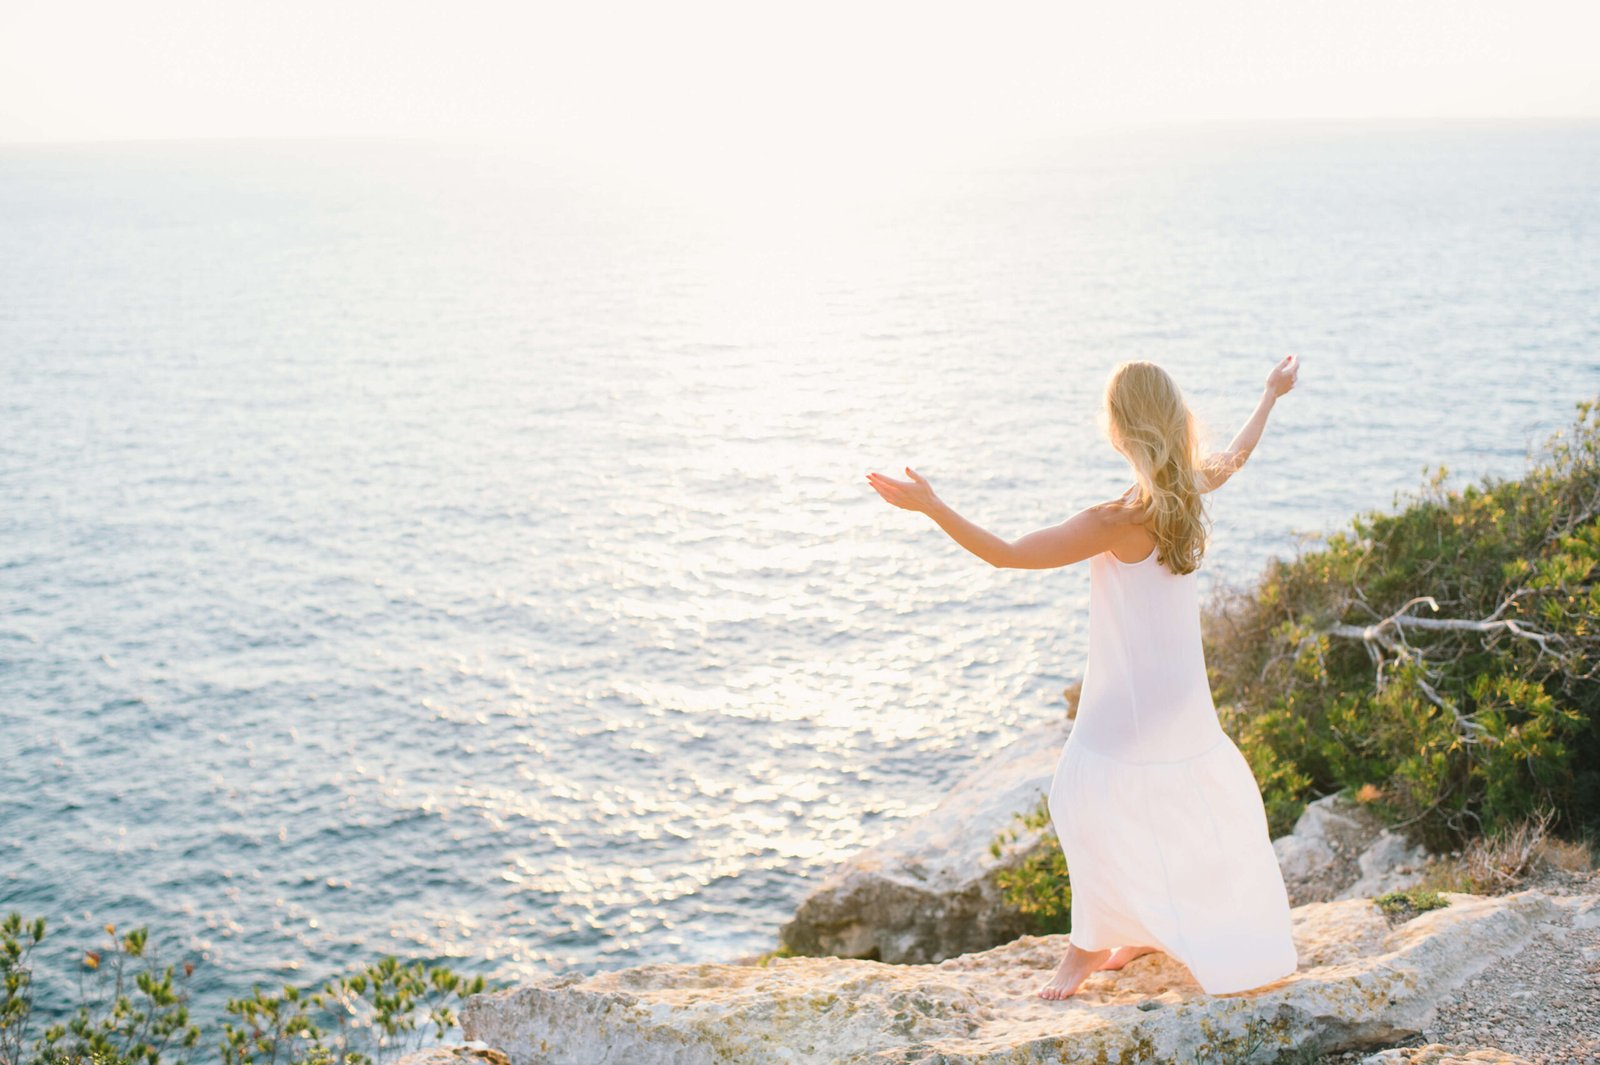 A woman in a white dress standing on a cliff overlooking the ocean while on one of these Algarve retreats.